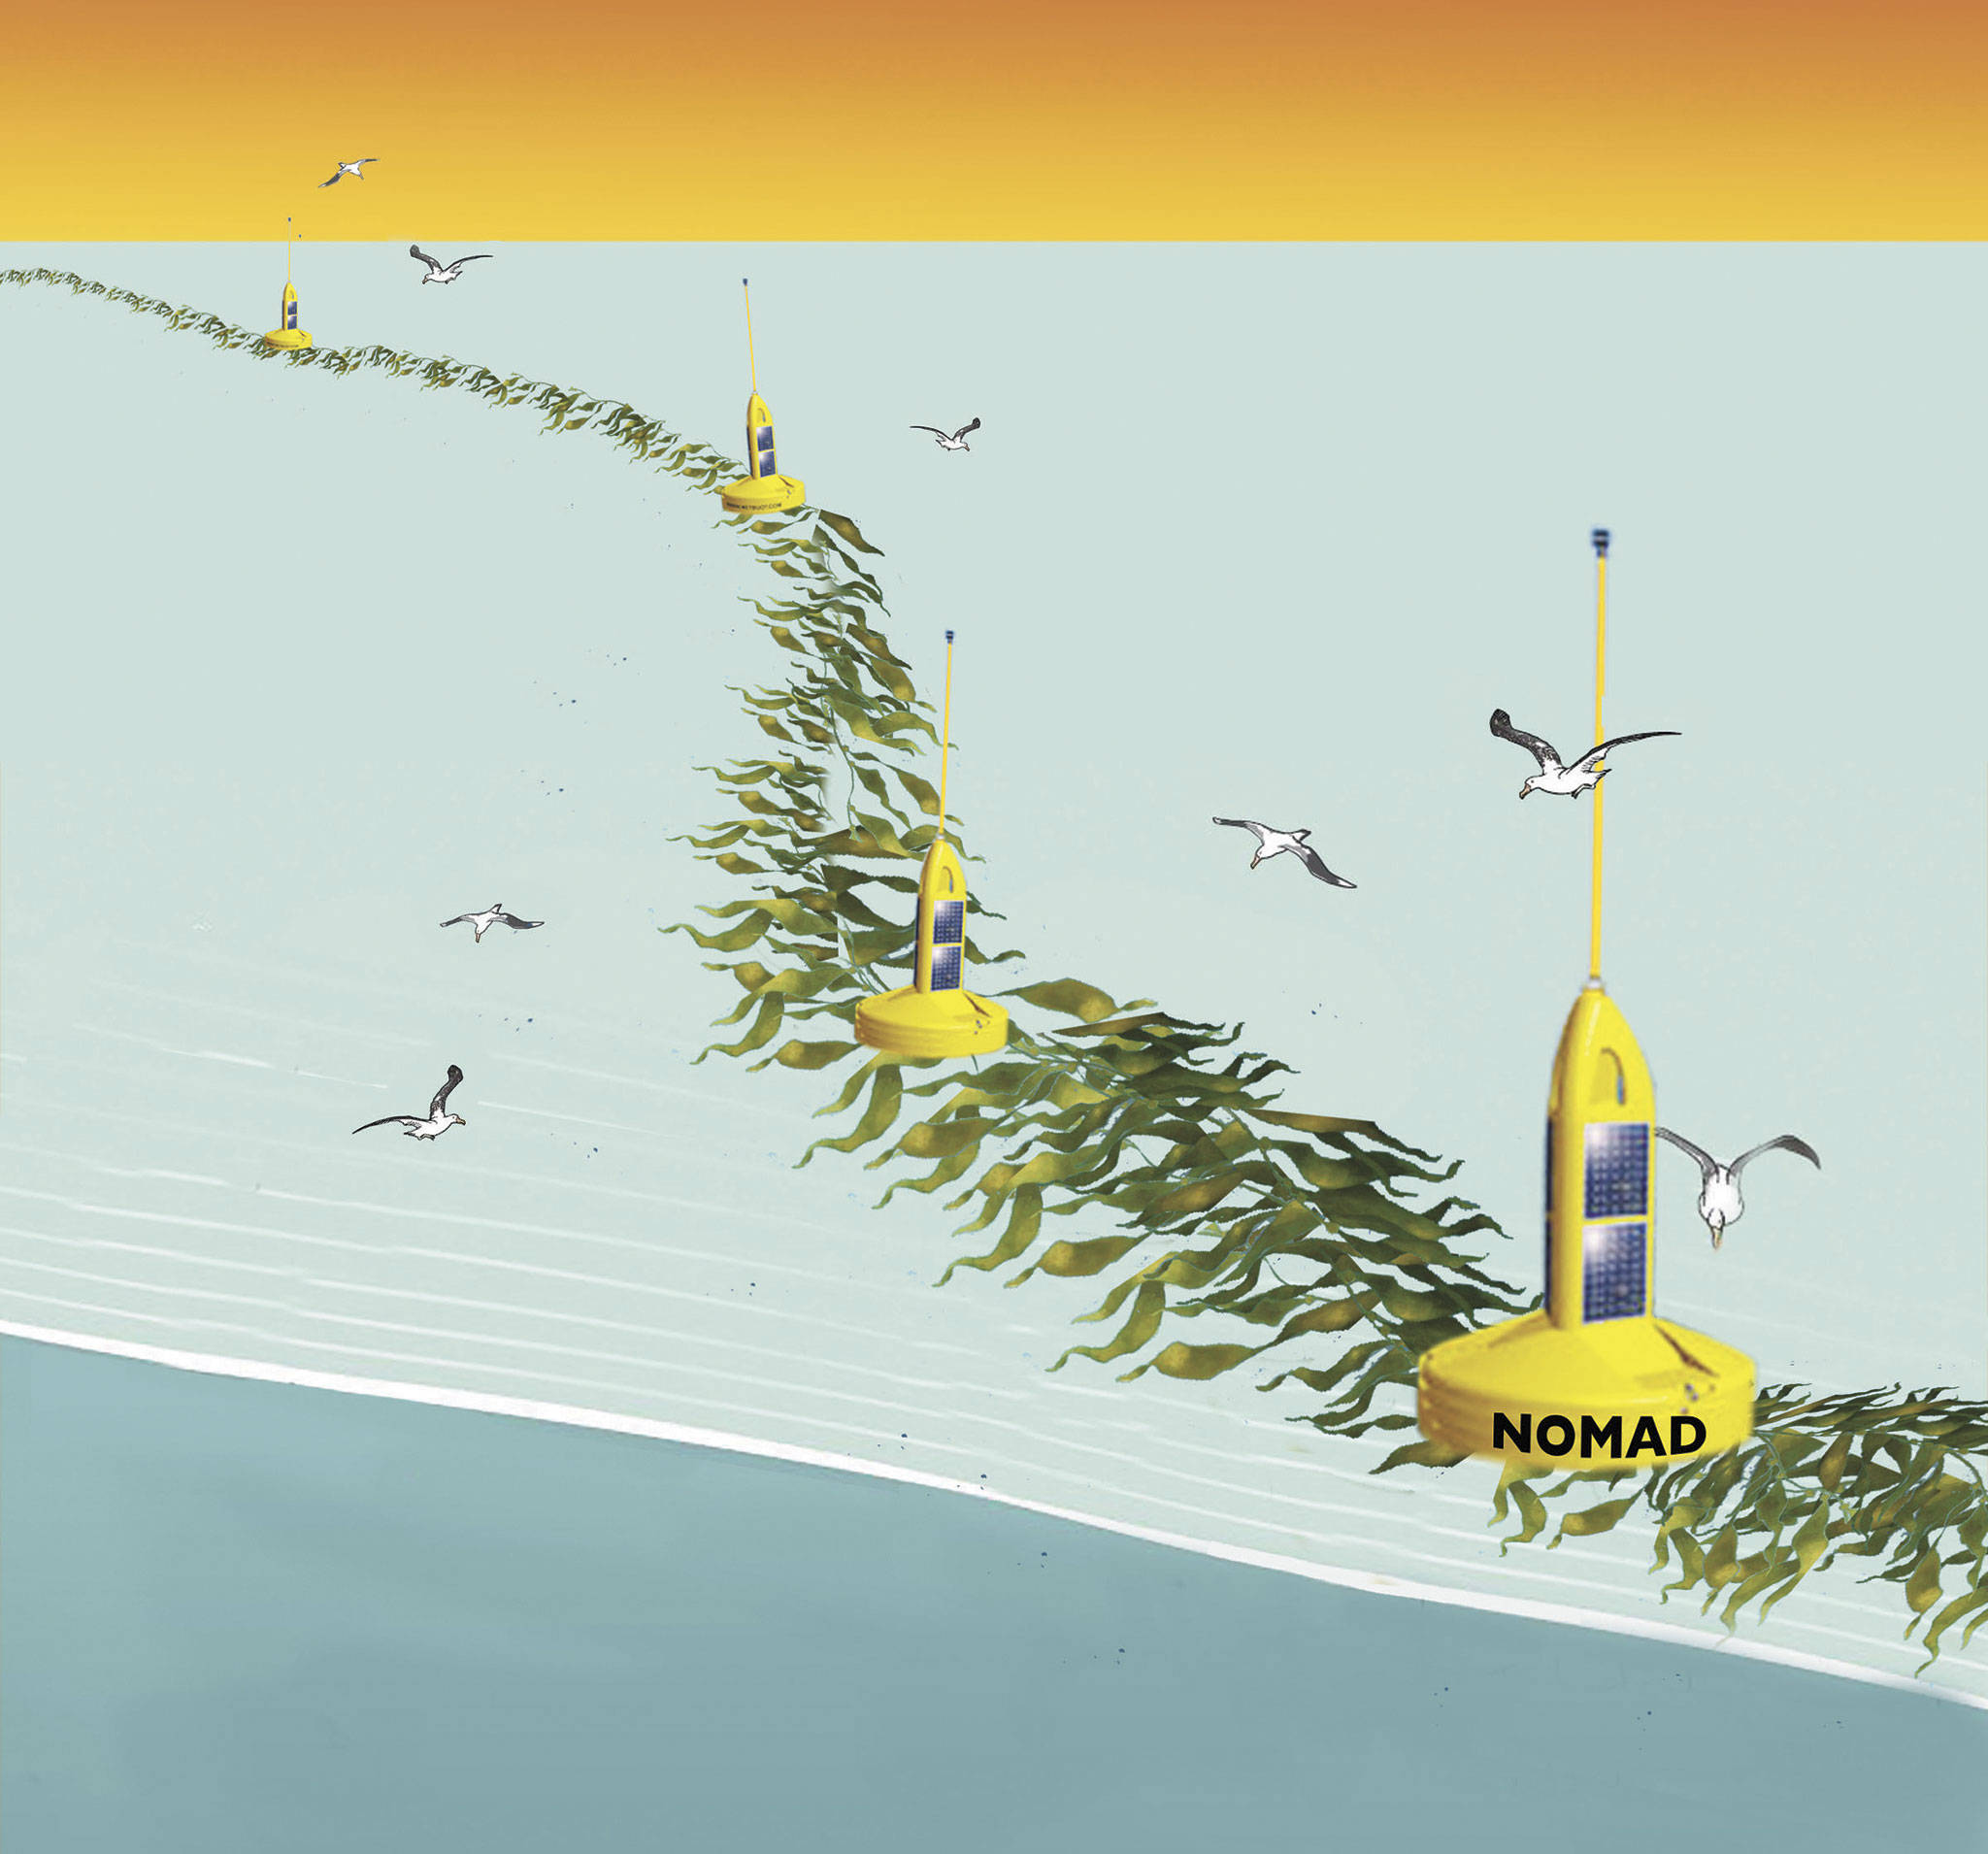 Scientists and researchers on the Olympic Peninsula are developing a project called NOMAD, or Nautical Offshore Macroalgal Autonomous Device, that floats along the Pacific Ocean to grow seaweed for use later as biofuel. Graphic by Reliance Laboratories